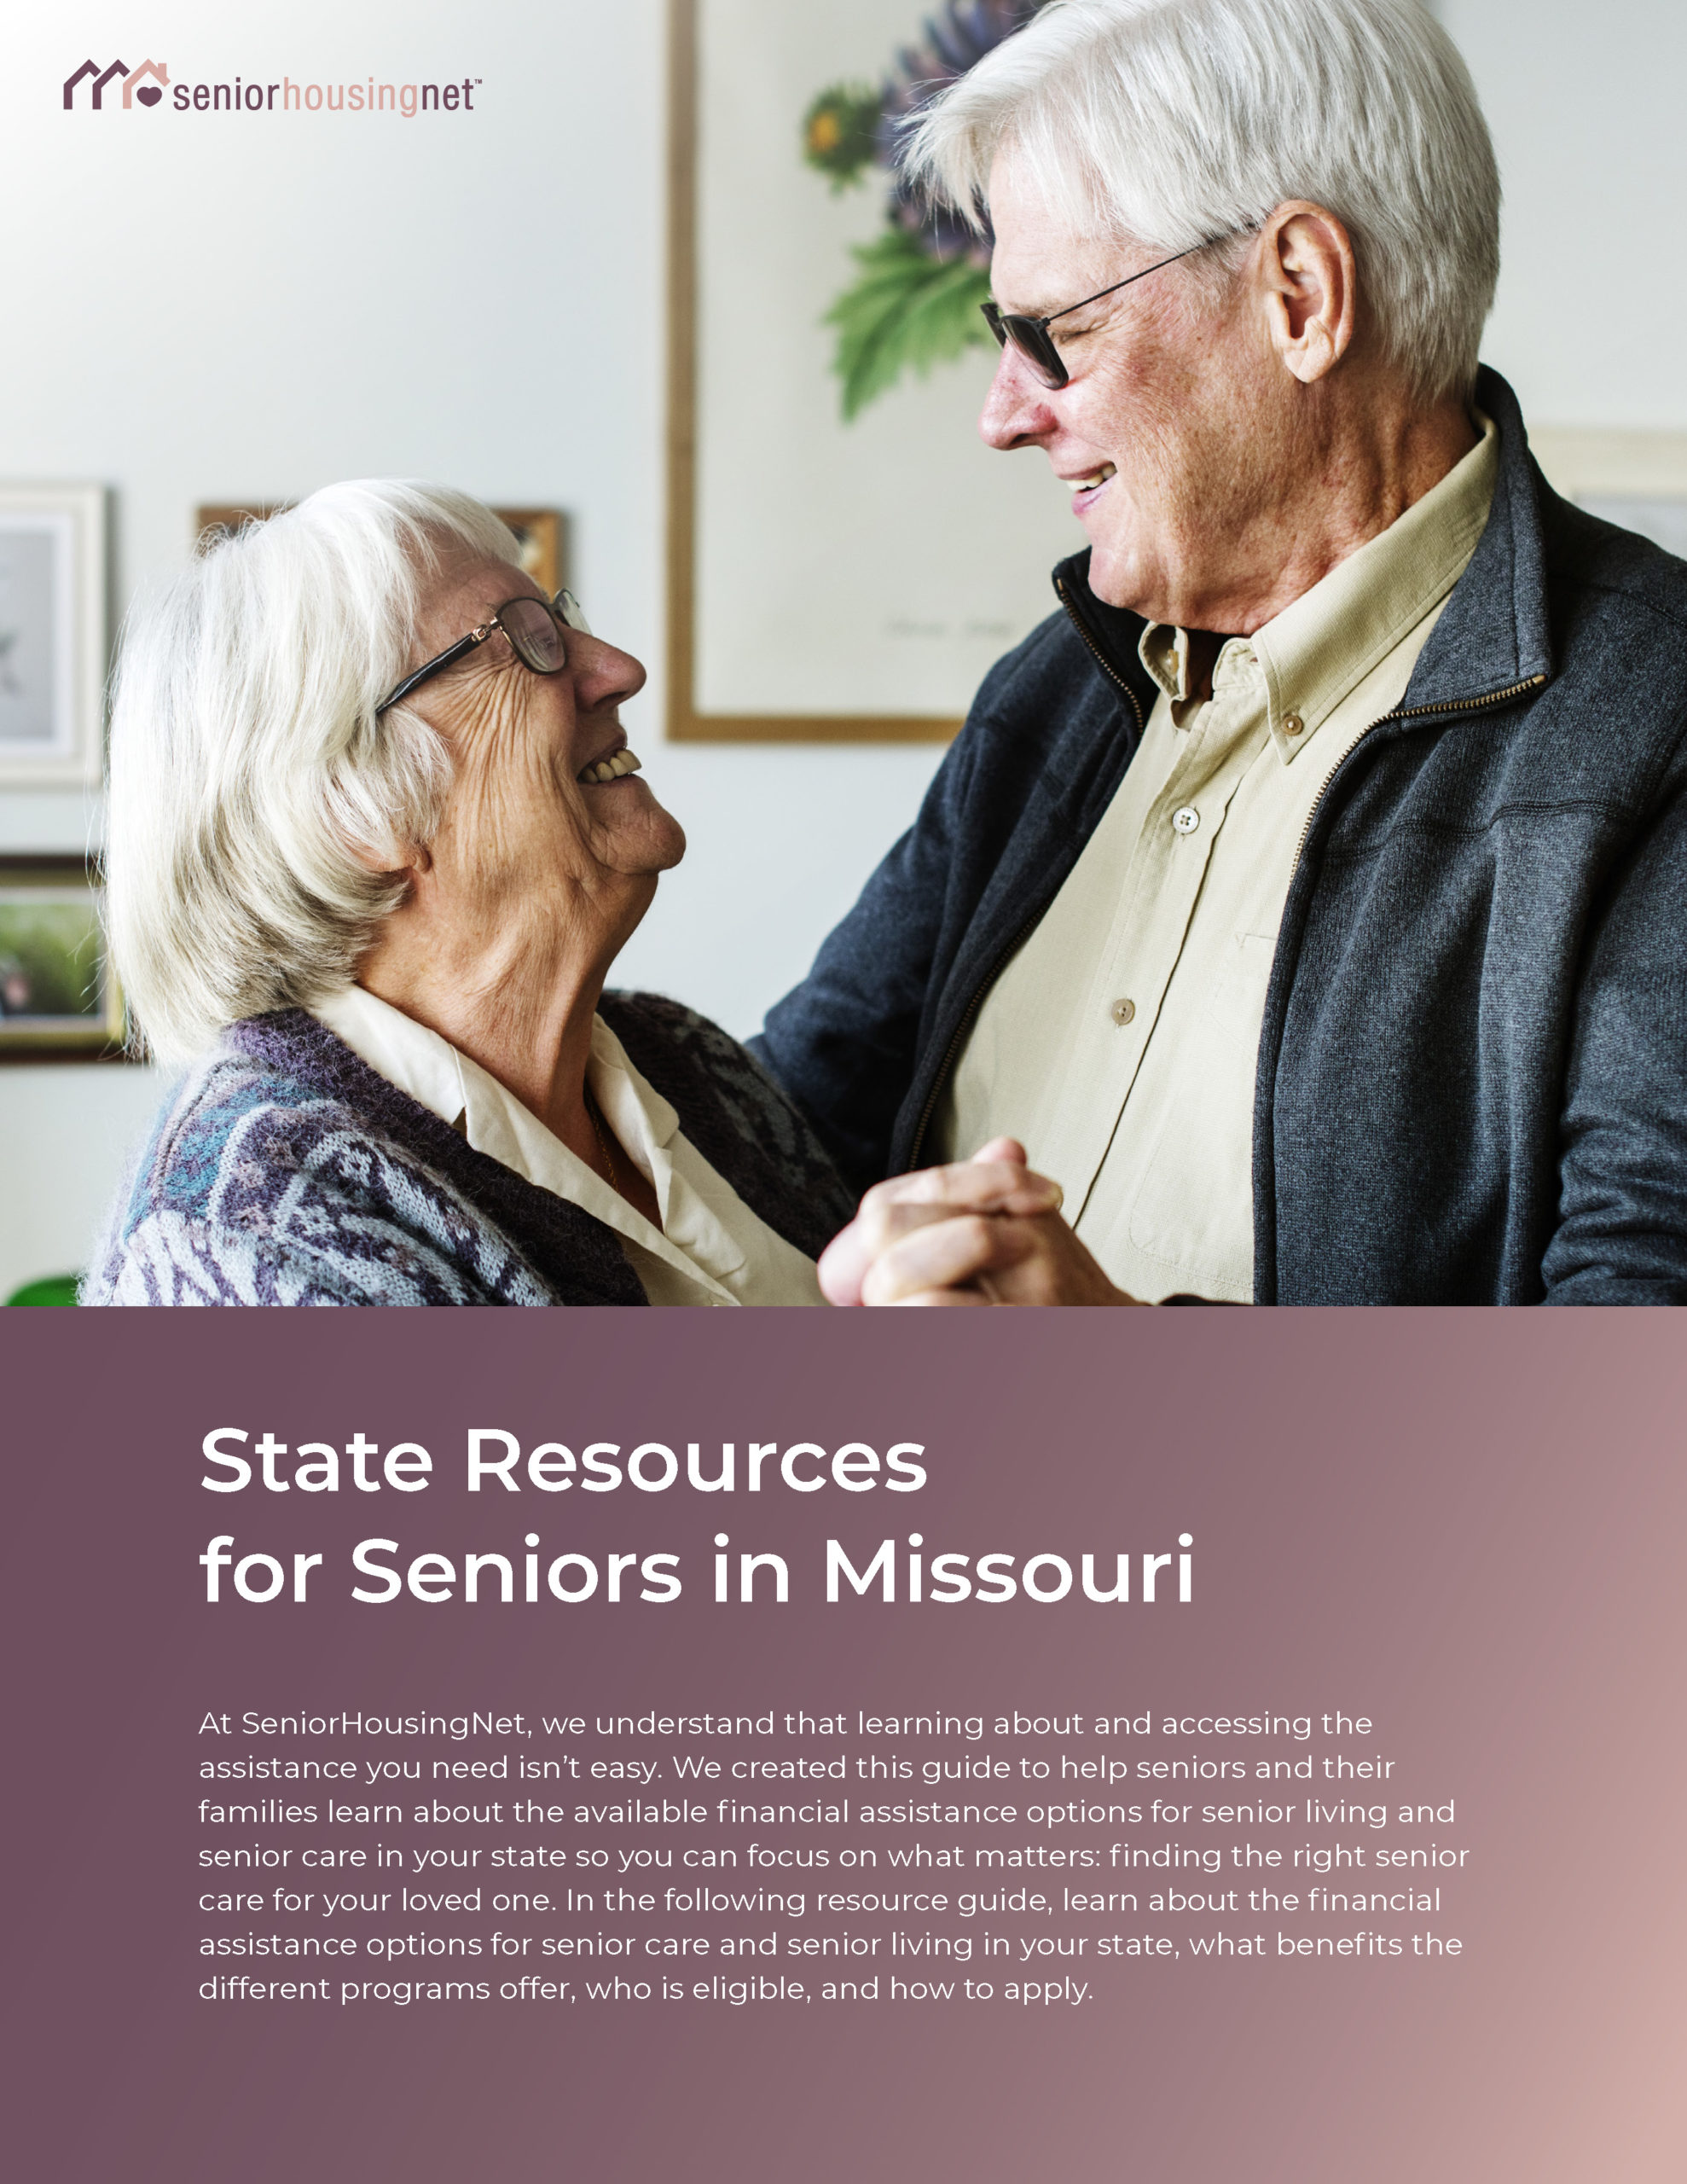 State Resources for Seniors in Missouri